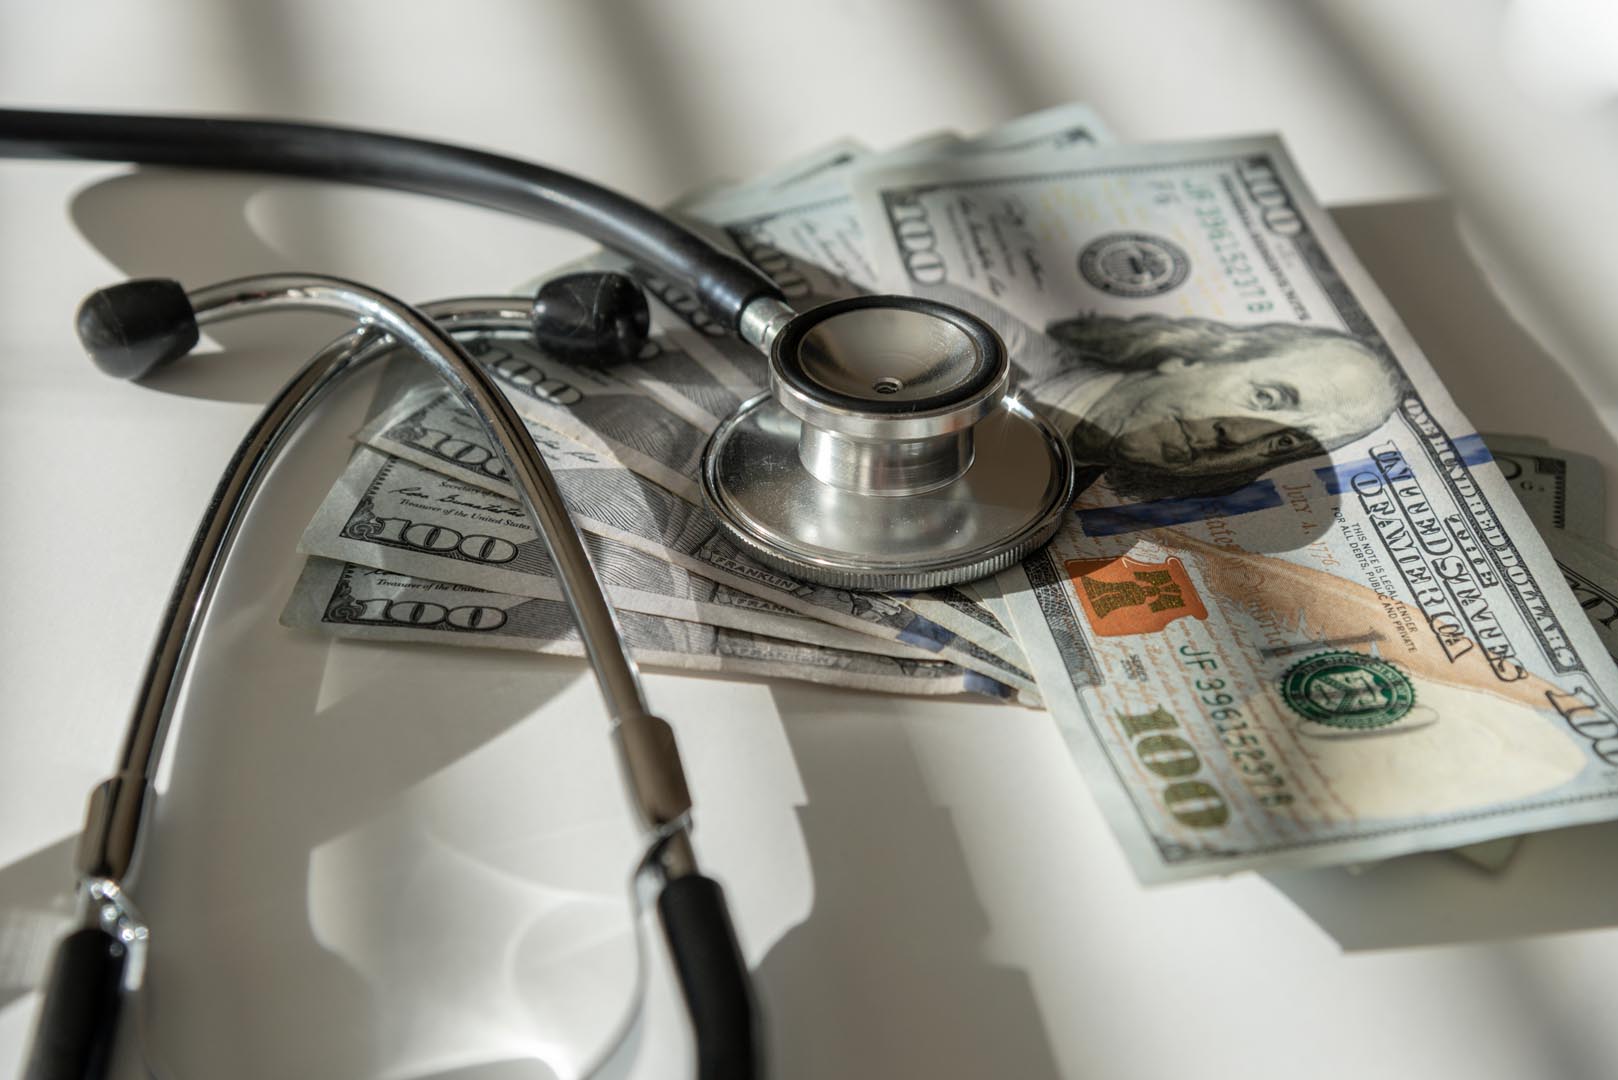 Ethics of Medicaid Fraud? What's the IMPACT of Medicaid Fraud?